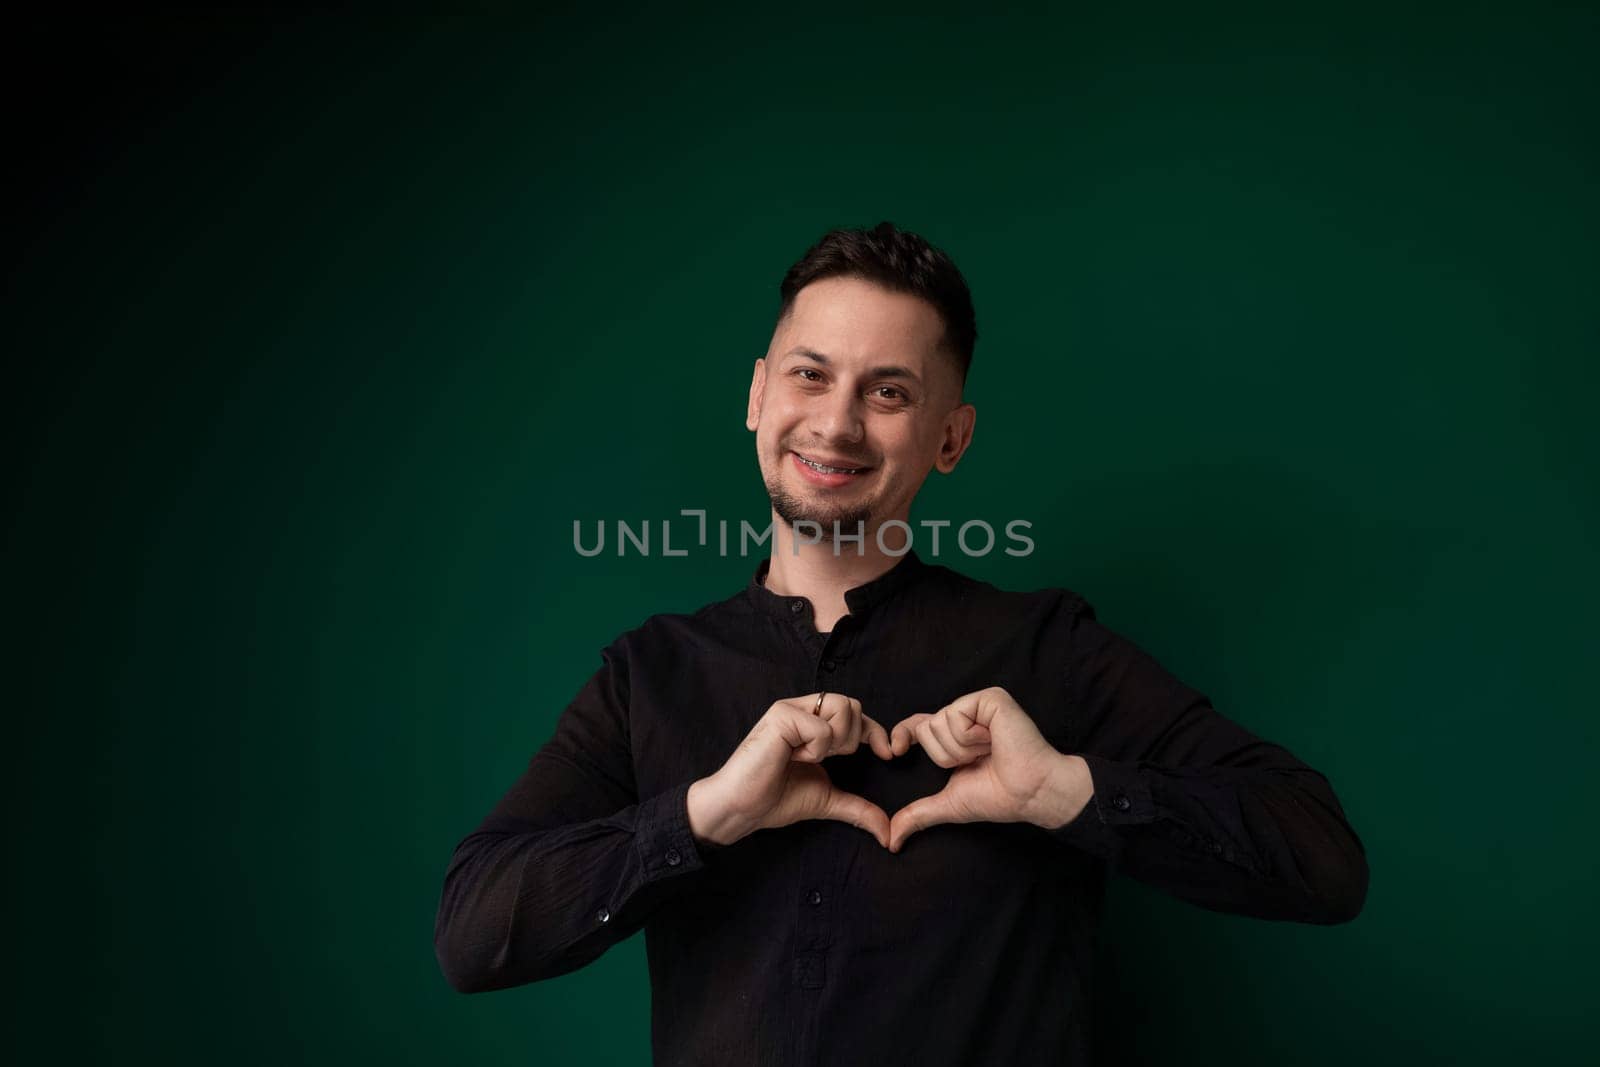 A man is forming a heart shape with his hands, fingers touching to create the recognizable symbol of love and affection. The background is simple, allowing the focus to remain on the gesture he is making.